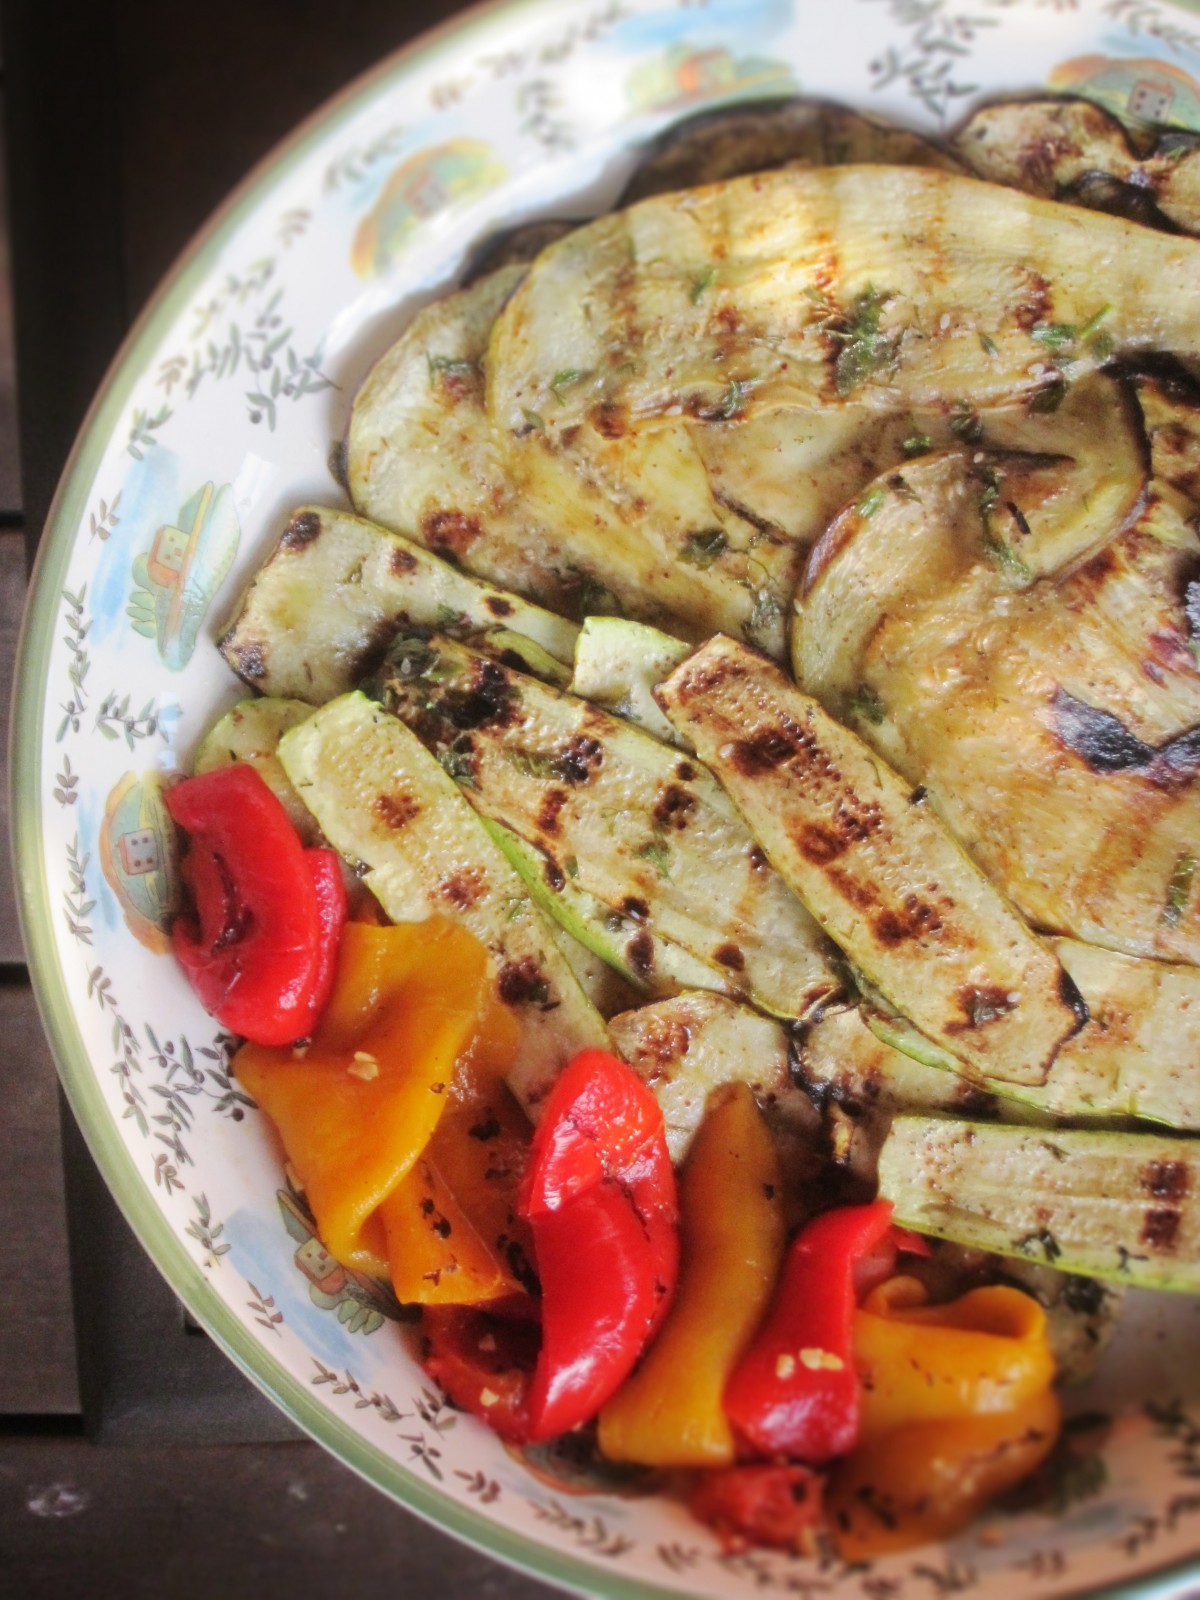 Perfectly Grilled Summer Vegetables With Sherry Vinegar and Honey Marinade (above)